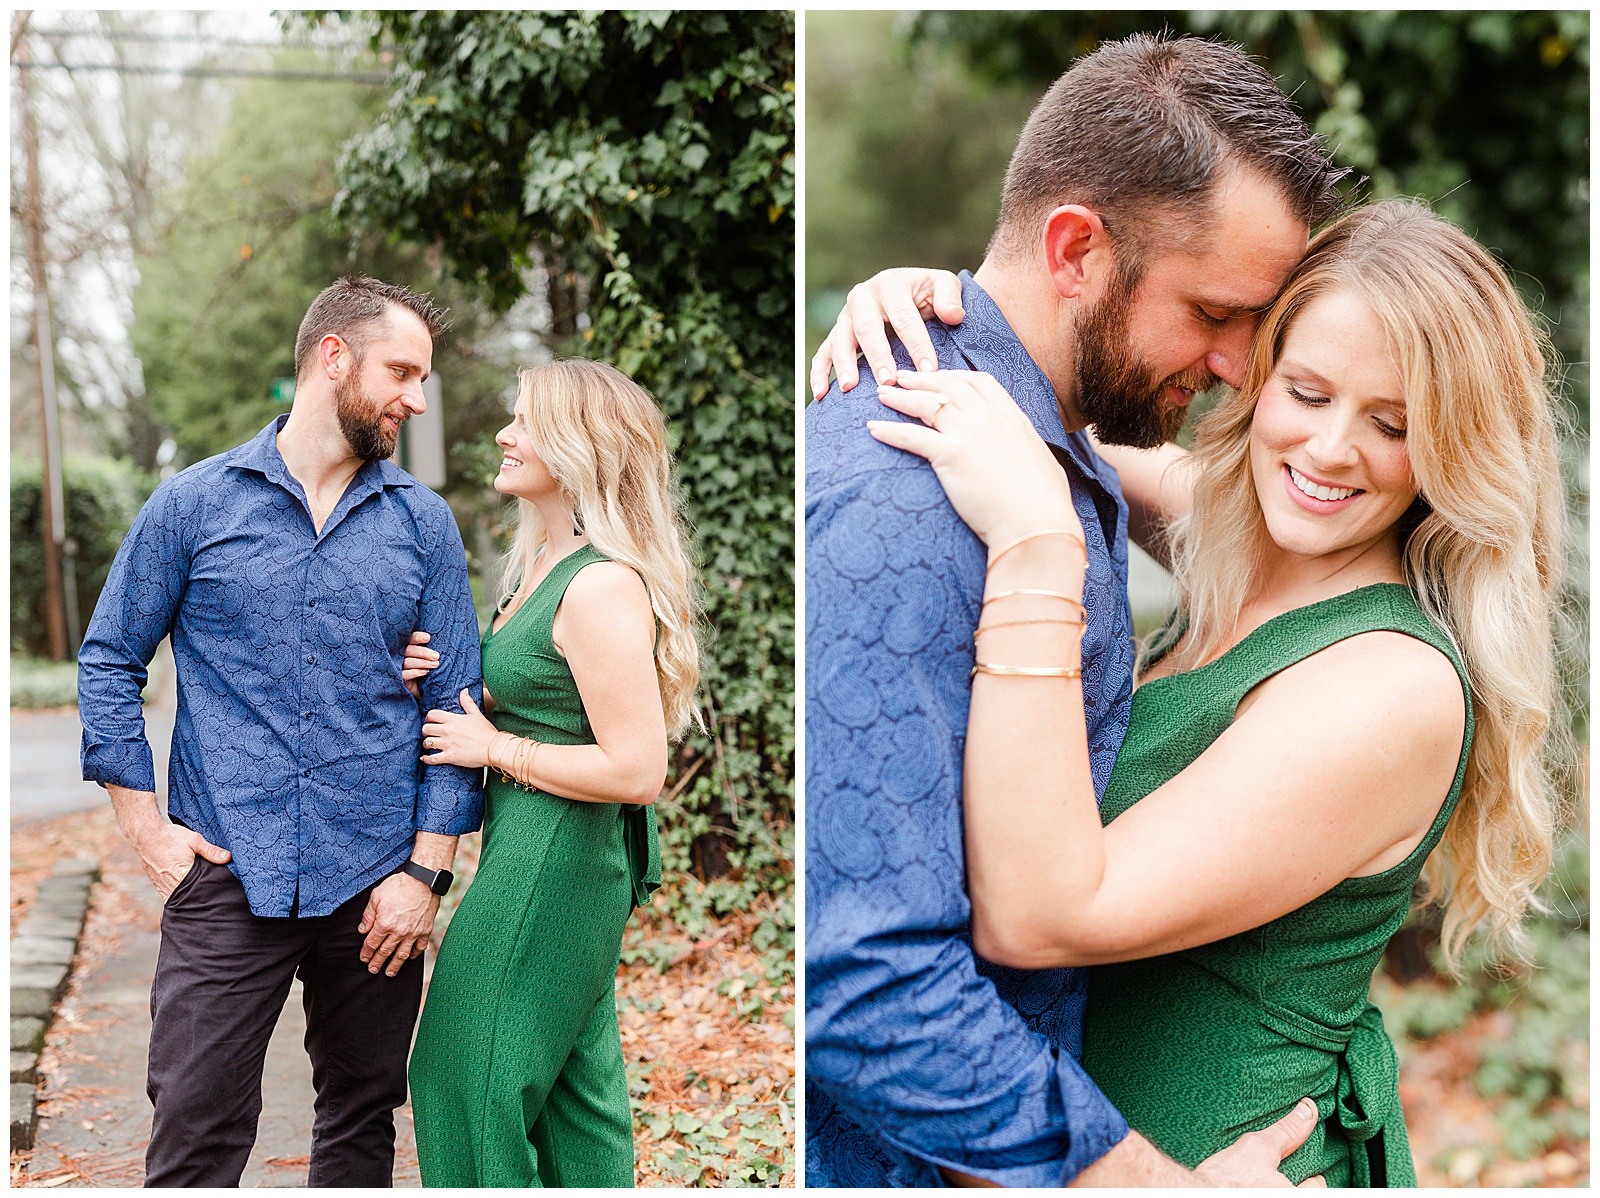 Adorable couple walking through park in downtown Waxhaw, NC Engagement Session with Green Dress Outfit Ideas